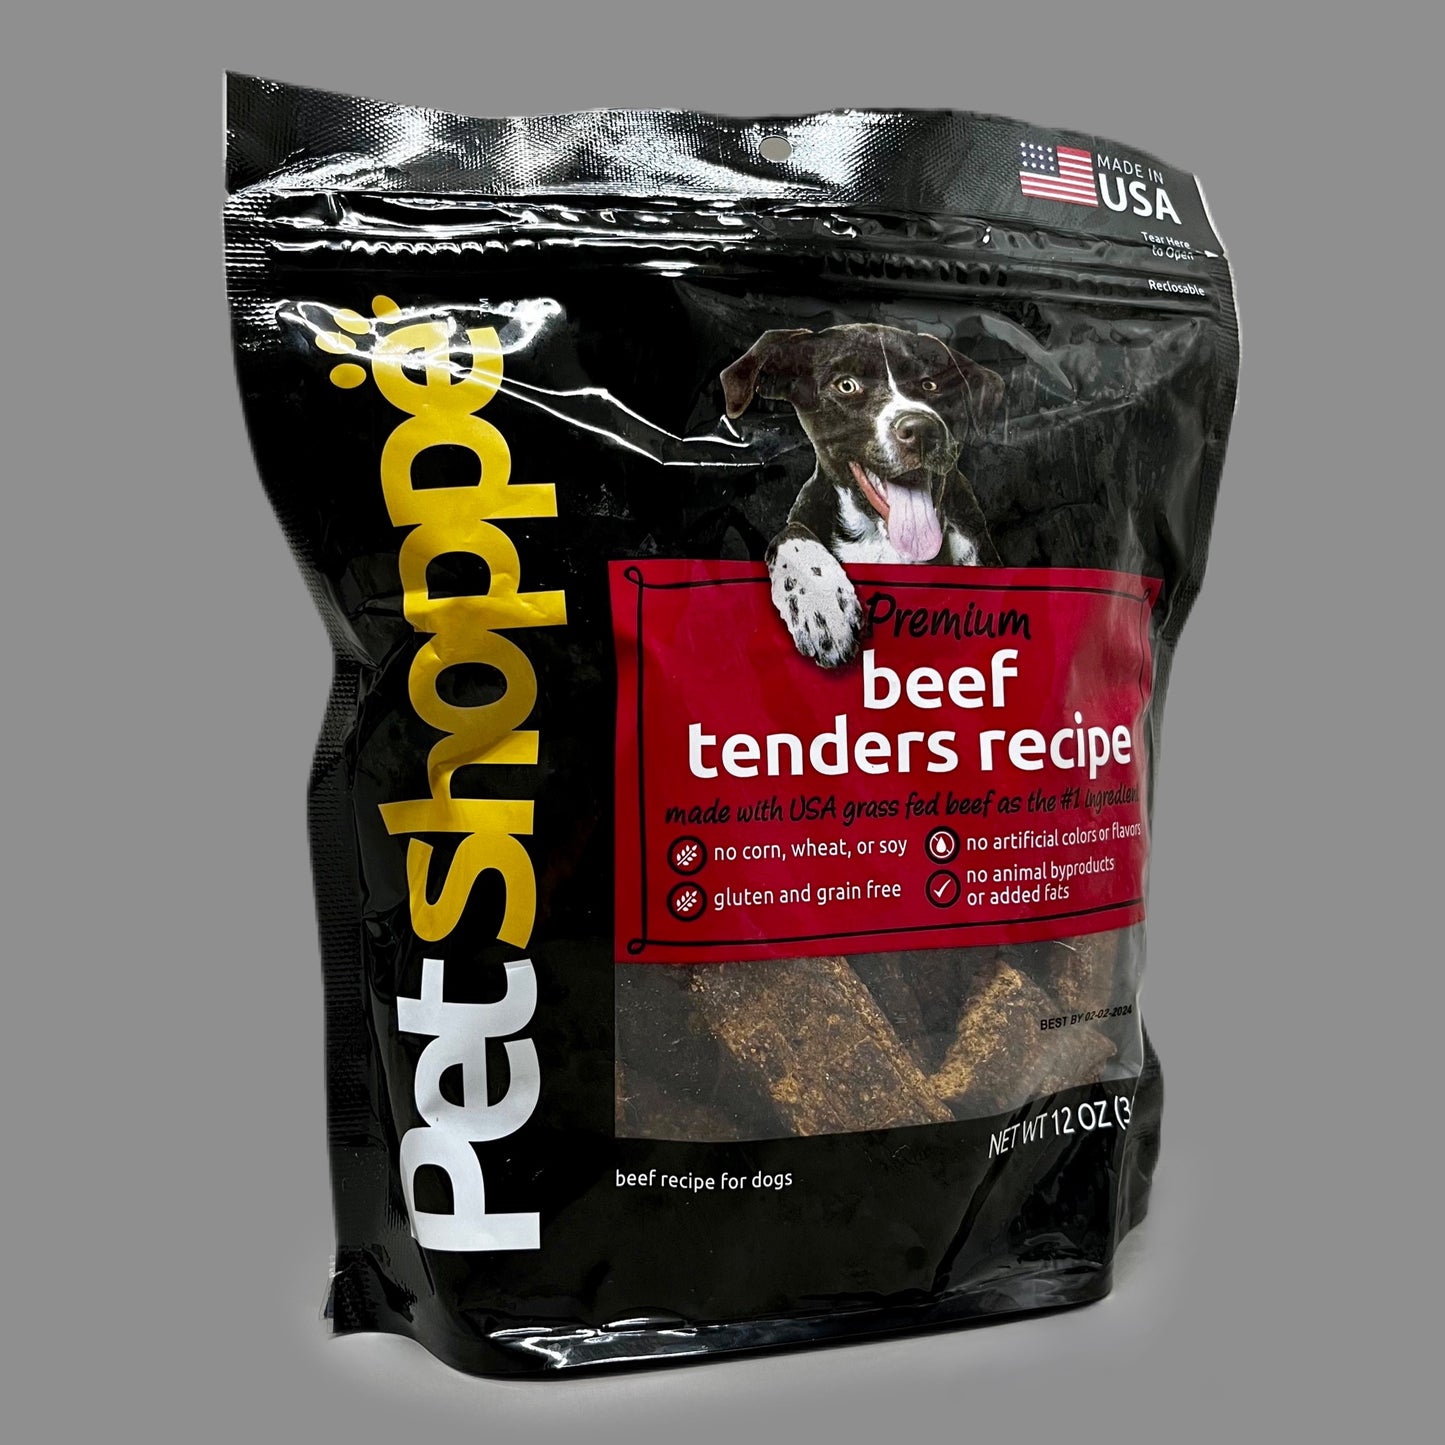 PETSHOPPE Premium Beef Tenders Dog Treats Made in USA All Natural 12 oz 02/24 (New)